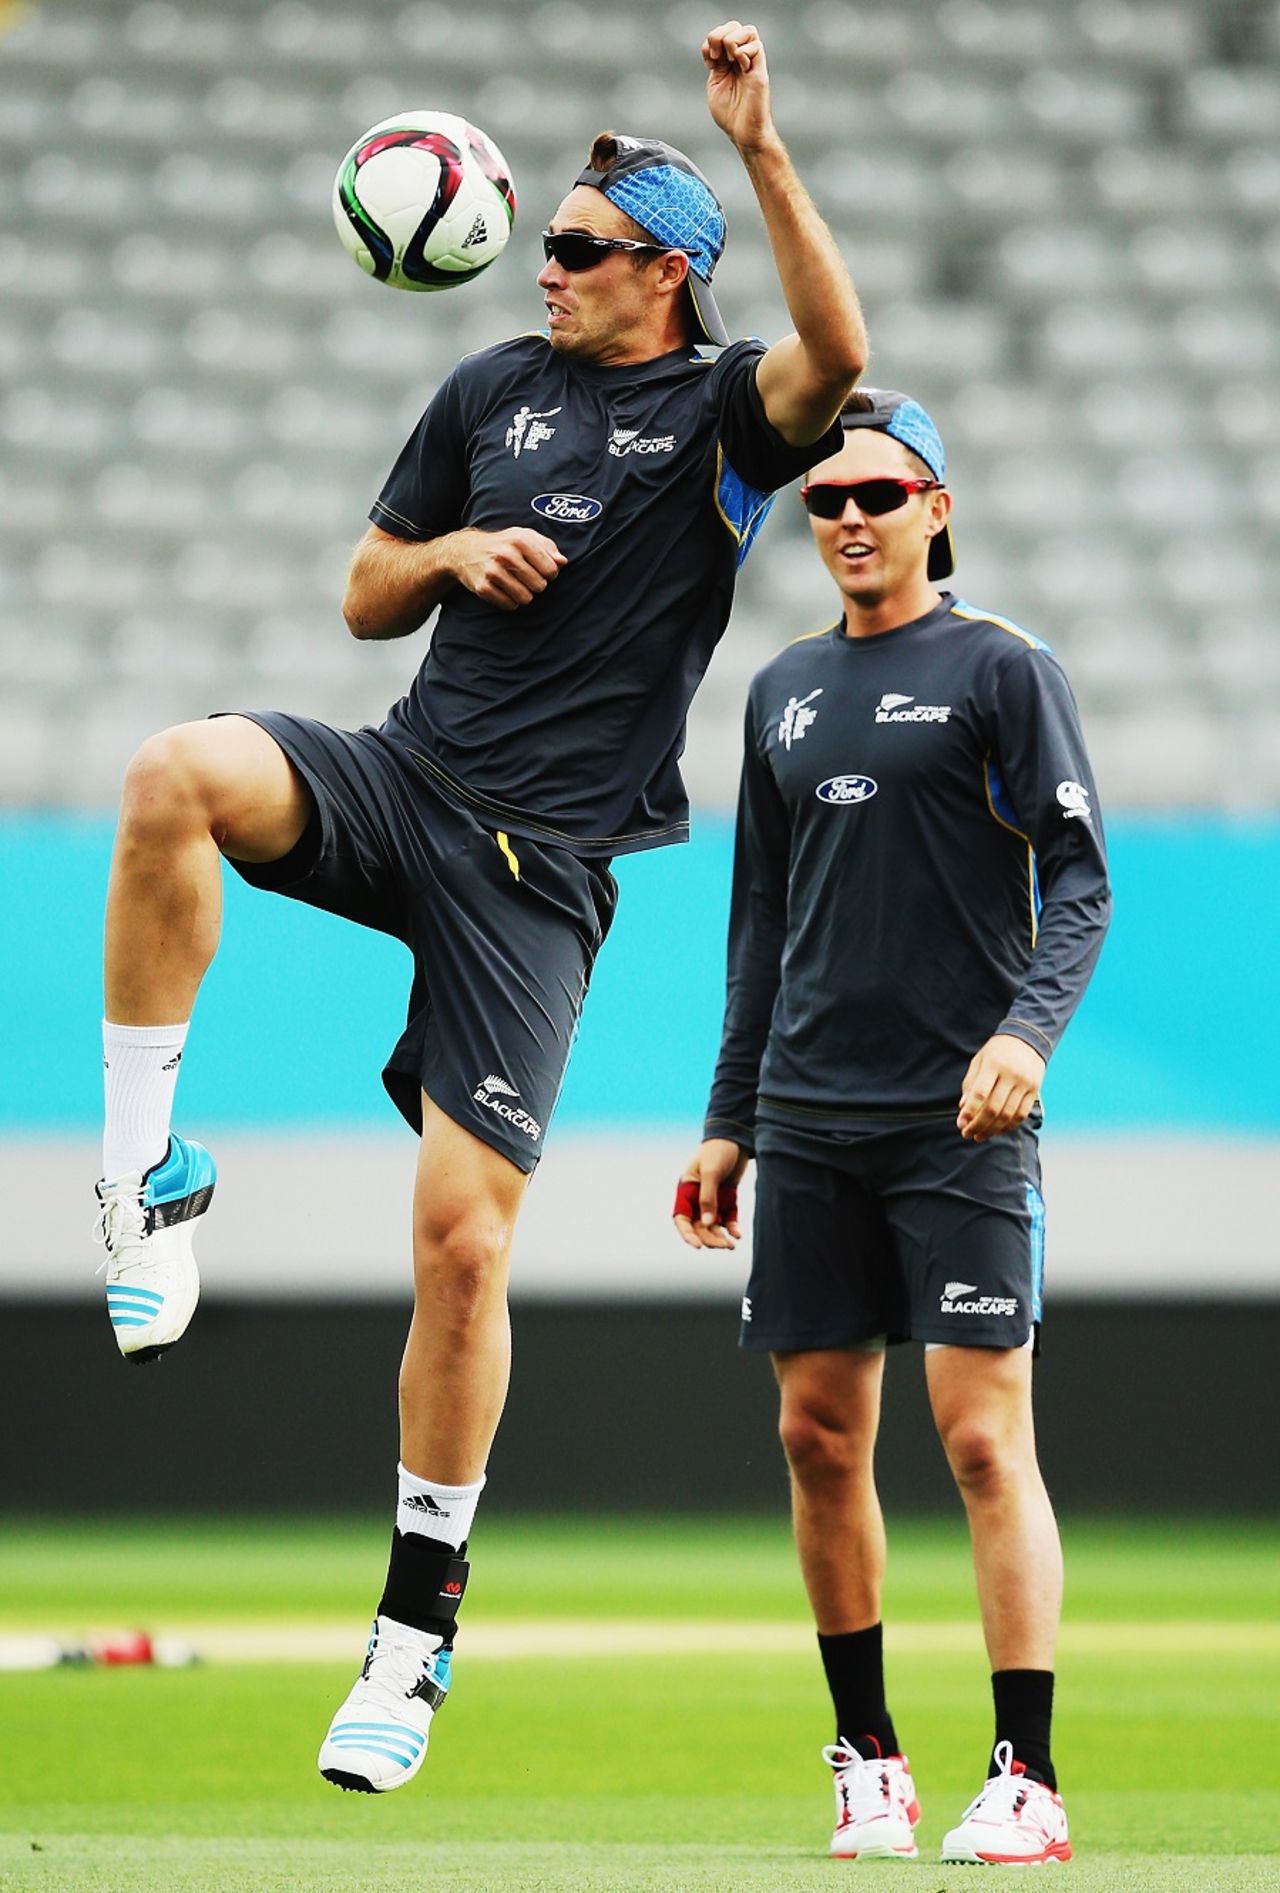 Tim Southee shows off his football skills, World Cup 2015, Auckland, March 23, 2015